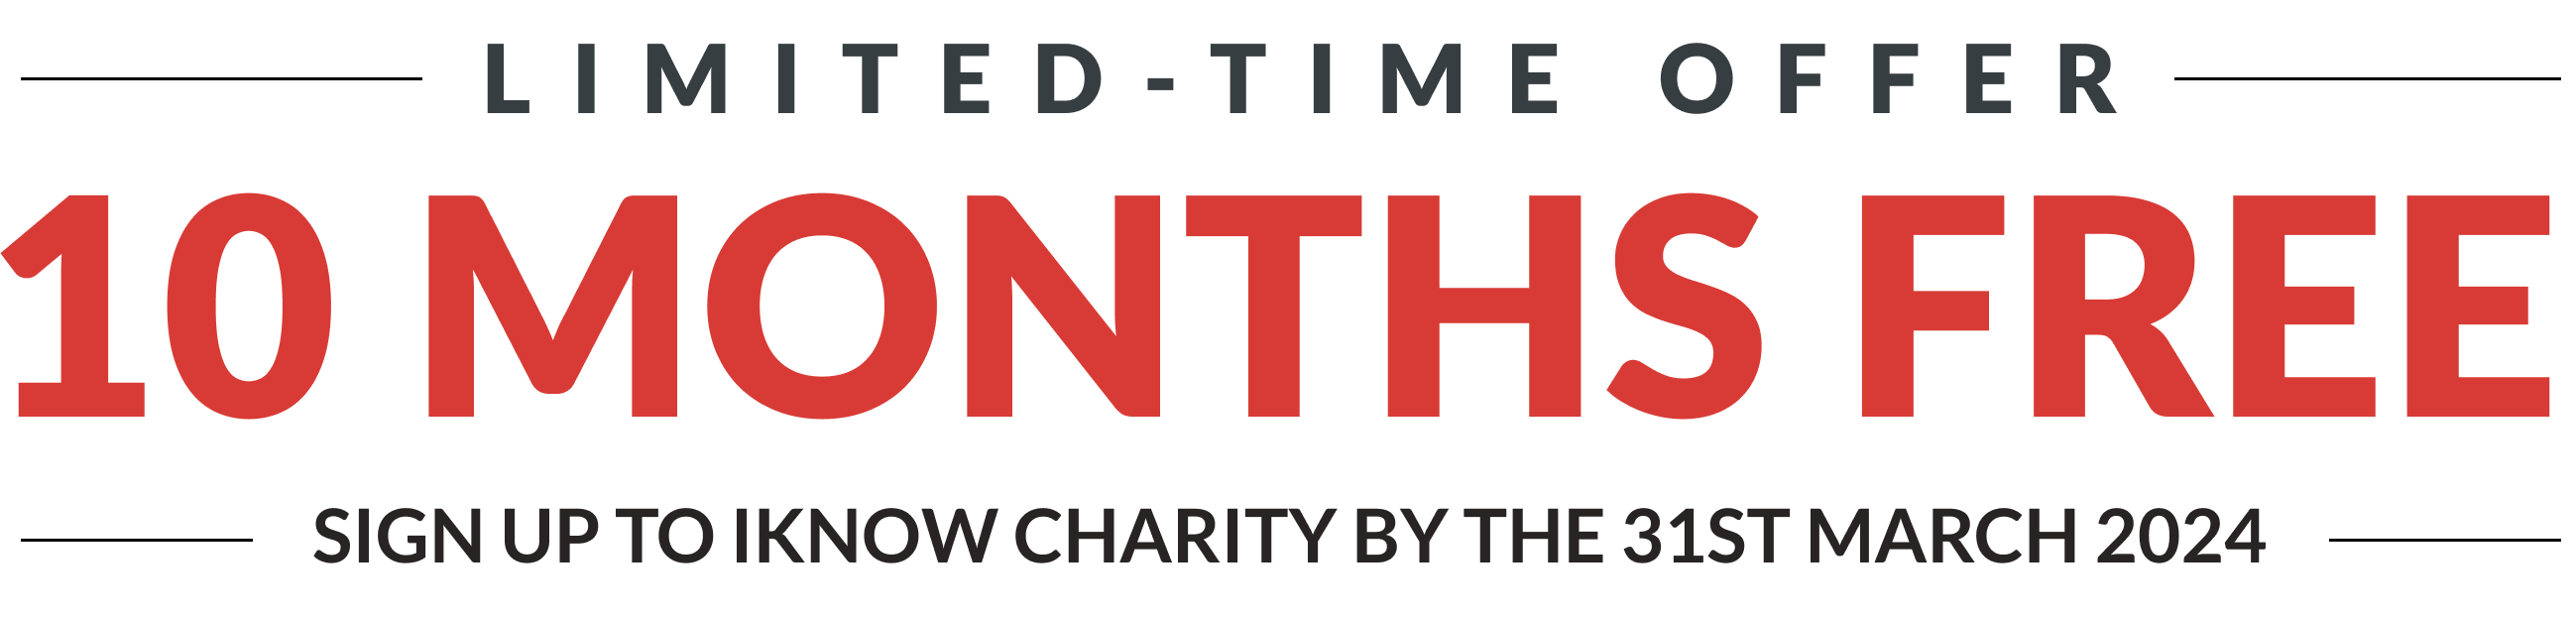 Sign up to iKnow Charity to get 10 months free